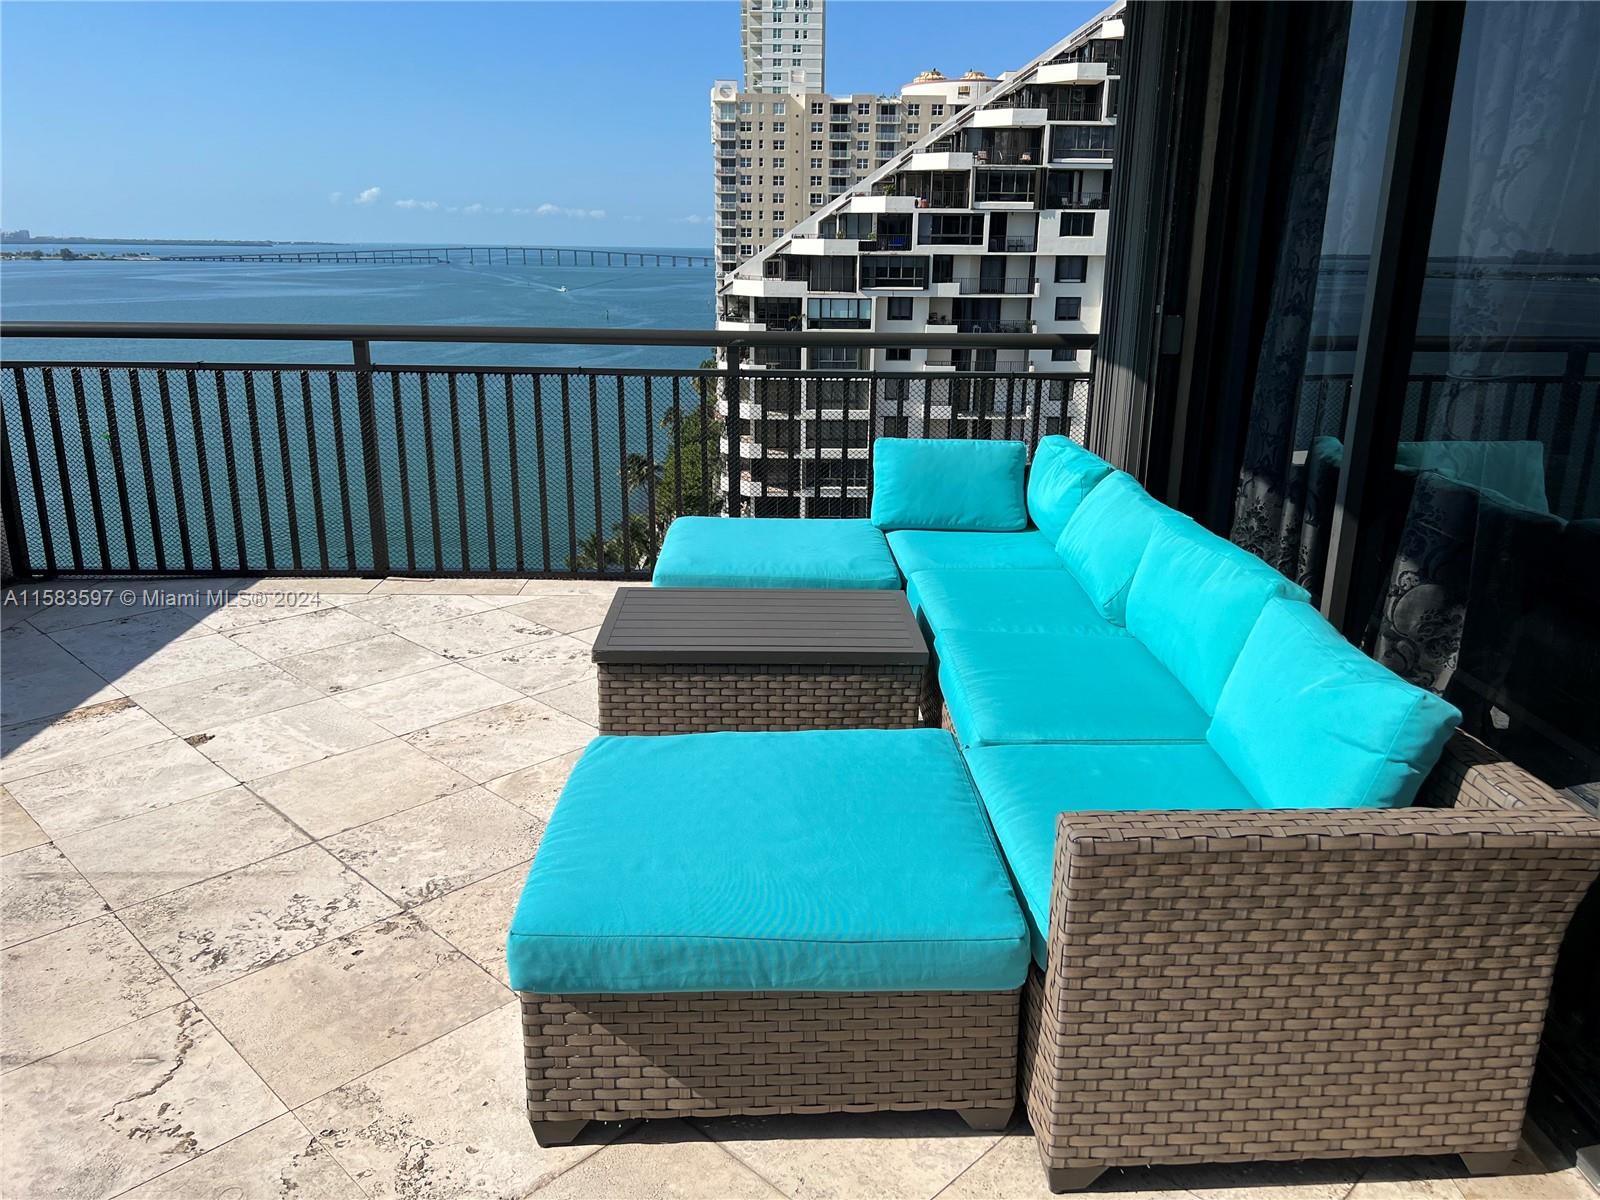 A rare find on Brickell Island! 3 bedroom/3 bathroom spectacular unit in a great shape with an unobstructed bay view from every window! Huge patio to enjoy boats passing by. Rent is allowed on yearly basis. Pets are allowed with some restrictions. There is a special assessment in amount of $1887 for the next 70 month. Buyer is anticipated to carry on with the special assessment. It's not included into the price.